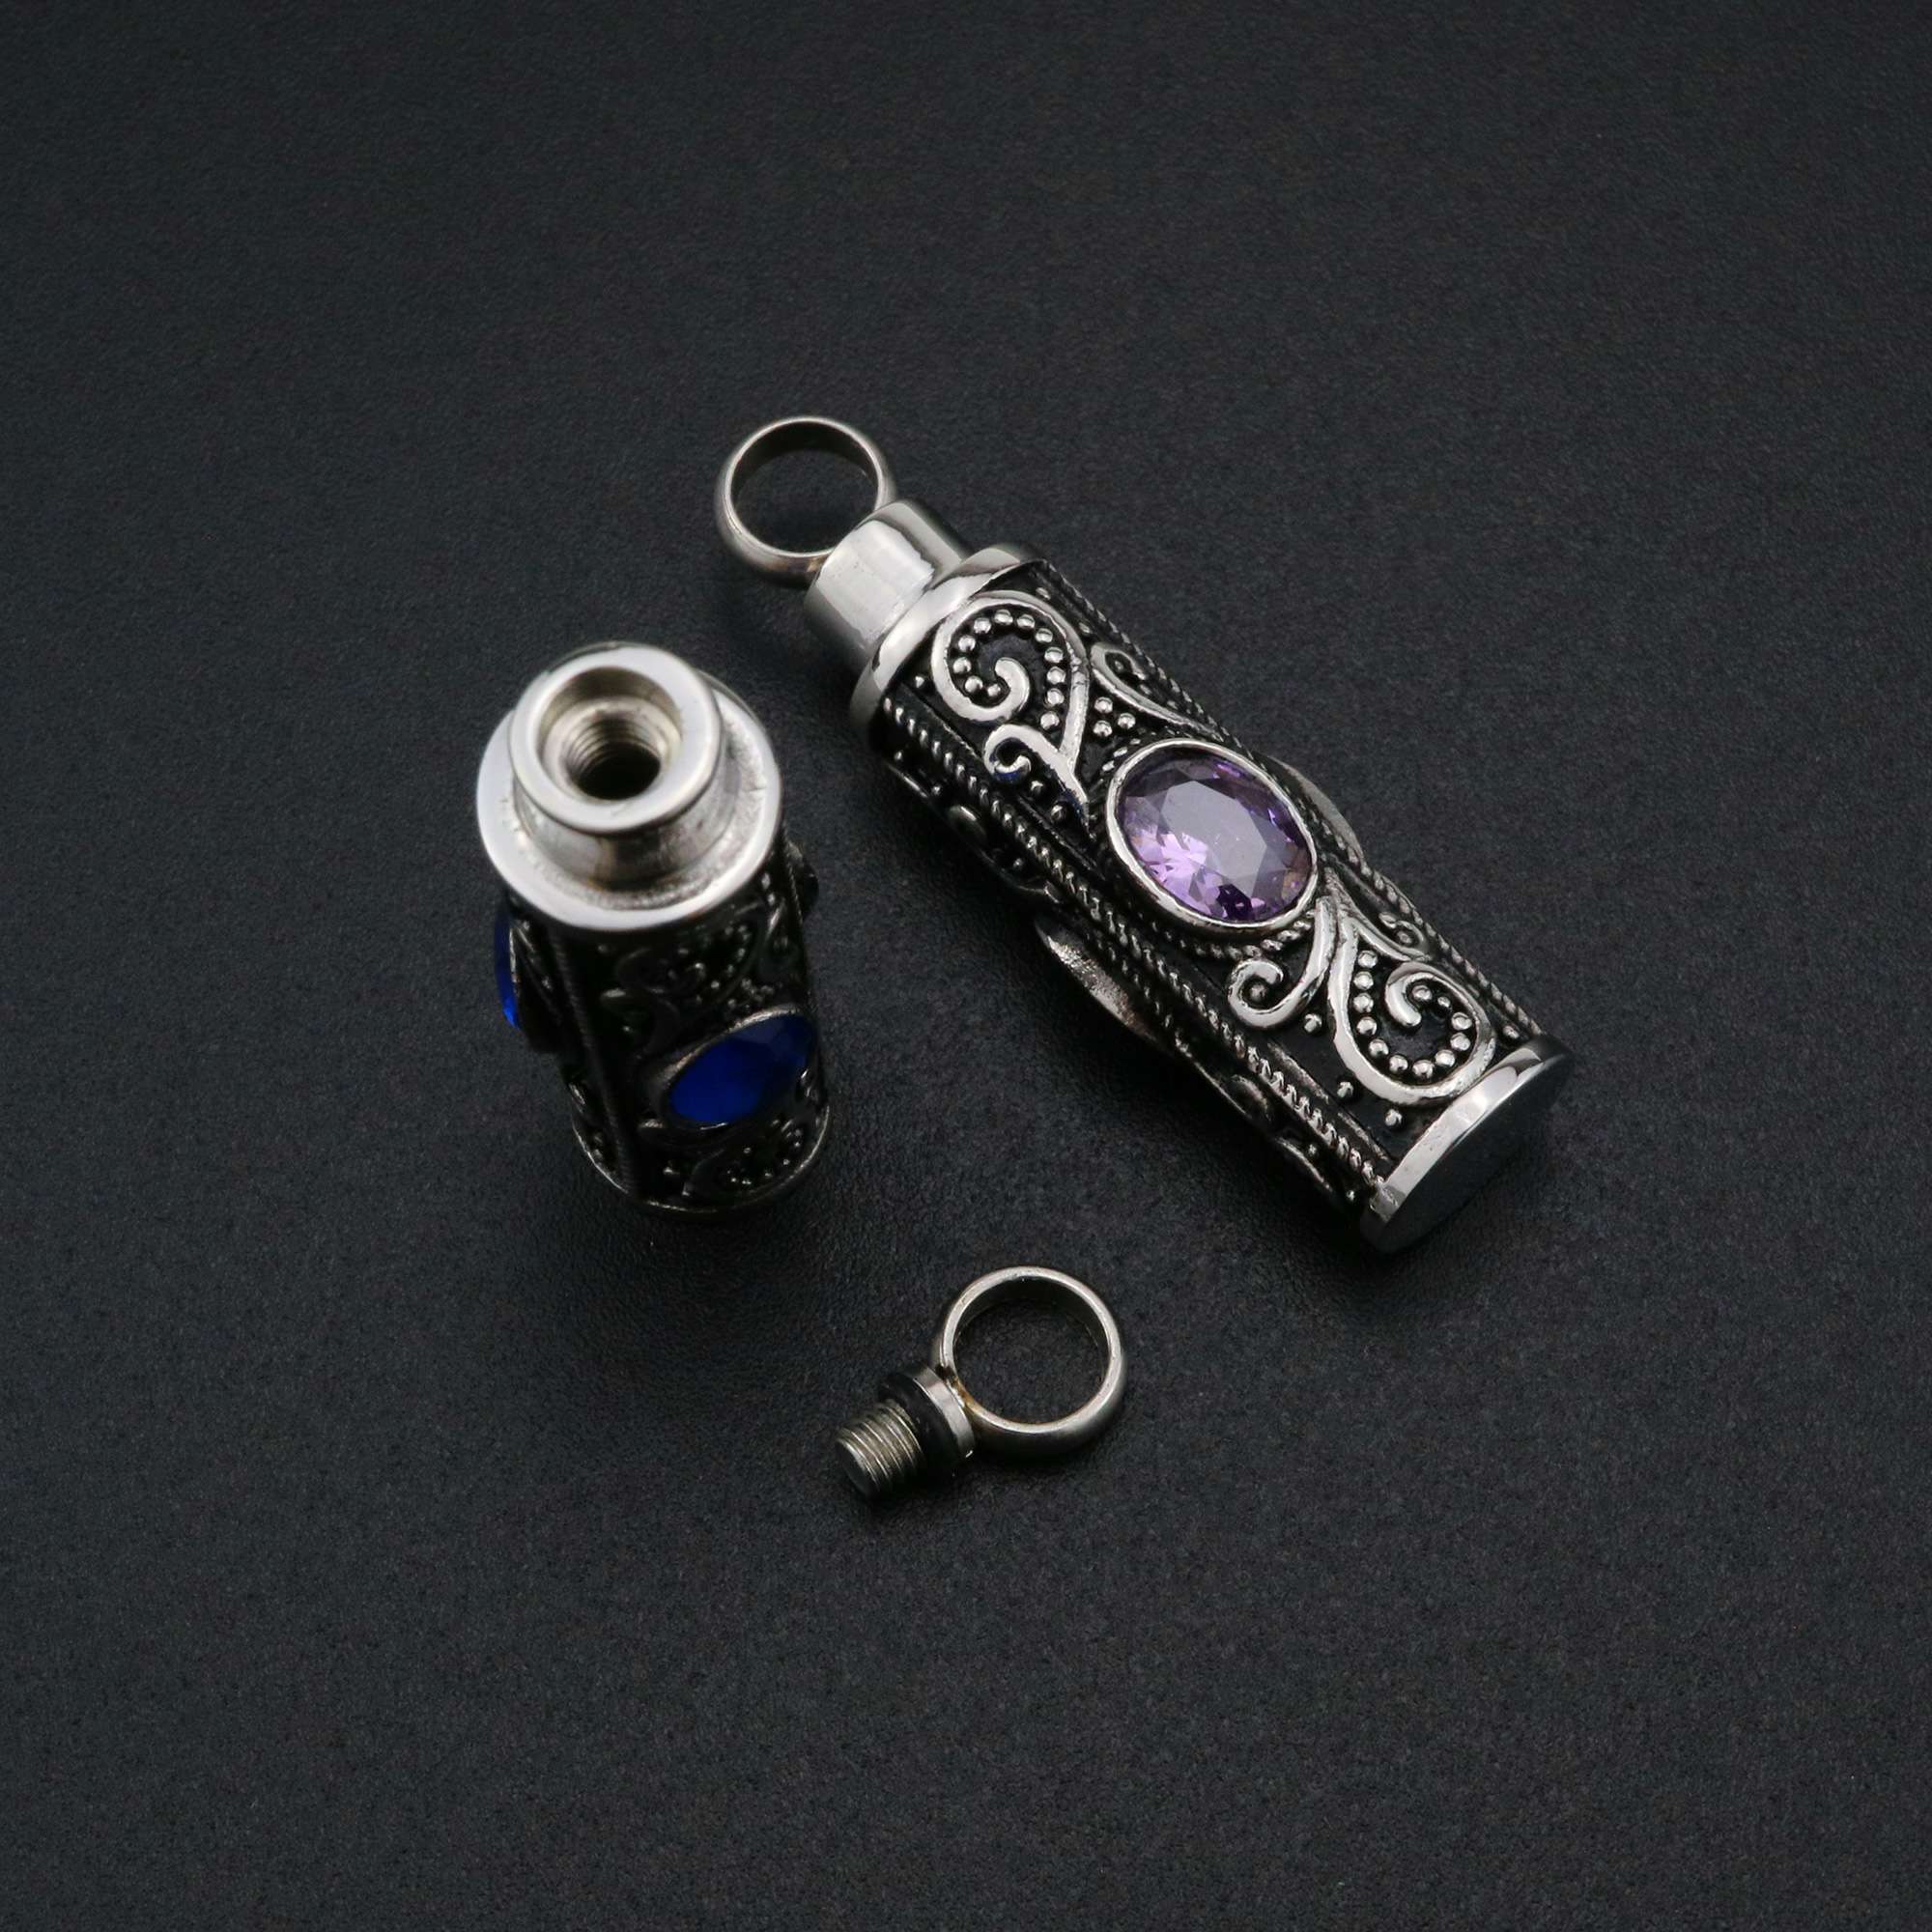 1Pcs Stainless Steel Tube Keepsake Ash Canister Cremation Urn Wish Vial Pendant Prayer Purfume Box 10x38MM Antiqued Silver 1190021 - Click Image to Close